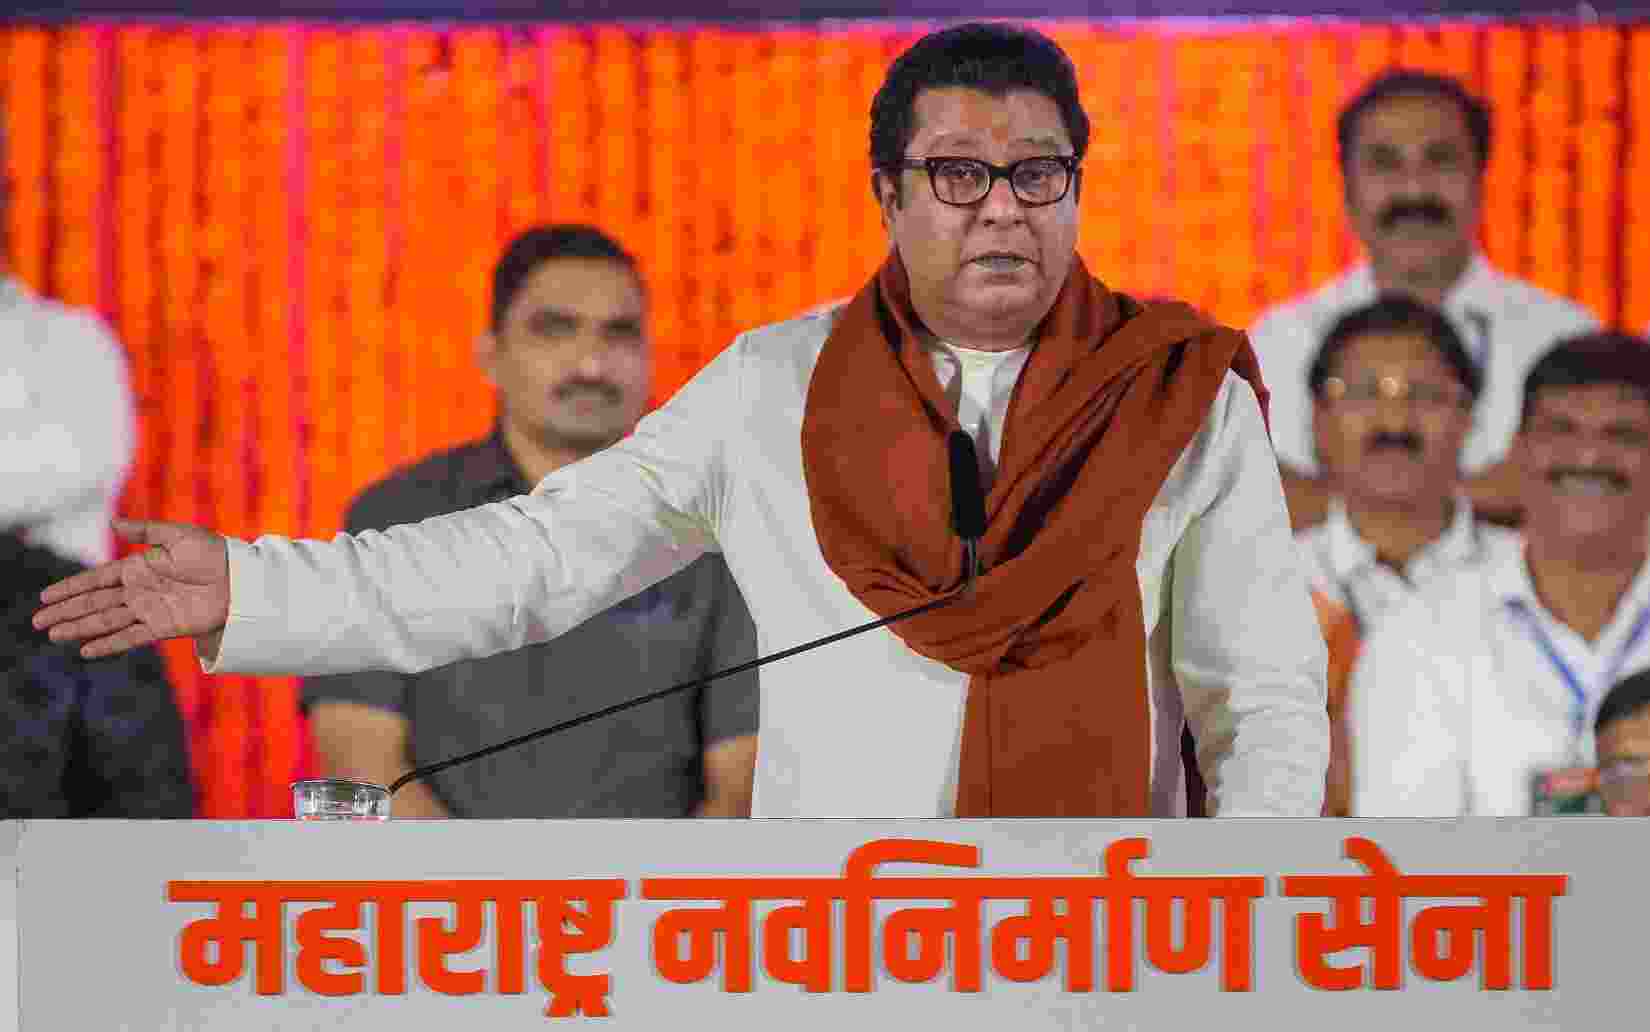 Raj Thackeray said at the rally that he 'was the first one, even before BJP, who said Narendra Modi should become the Prime Minister of India.'
